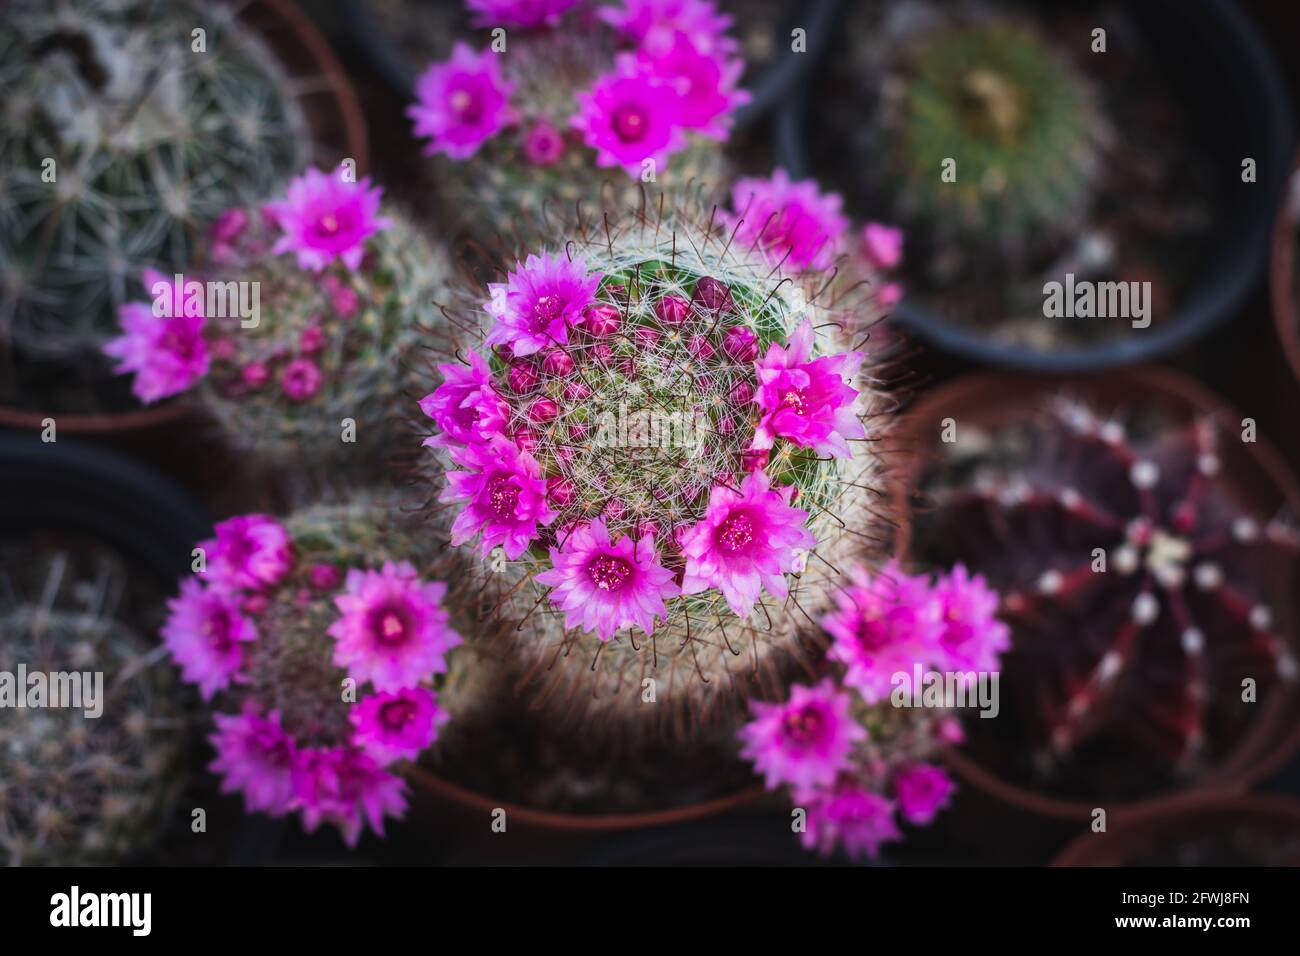 Mammillaria cactus, a special type with pink flowers, blurred background Stock Photo